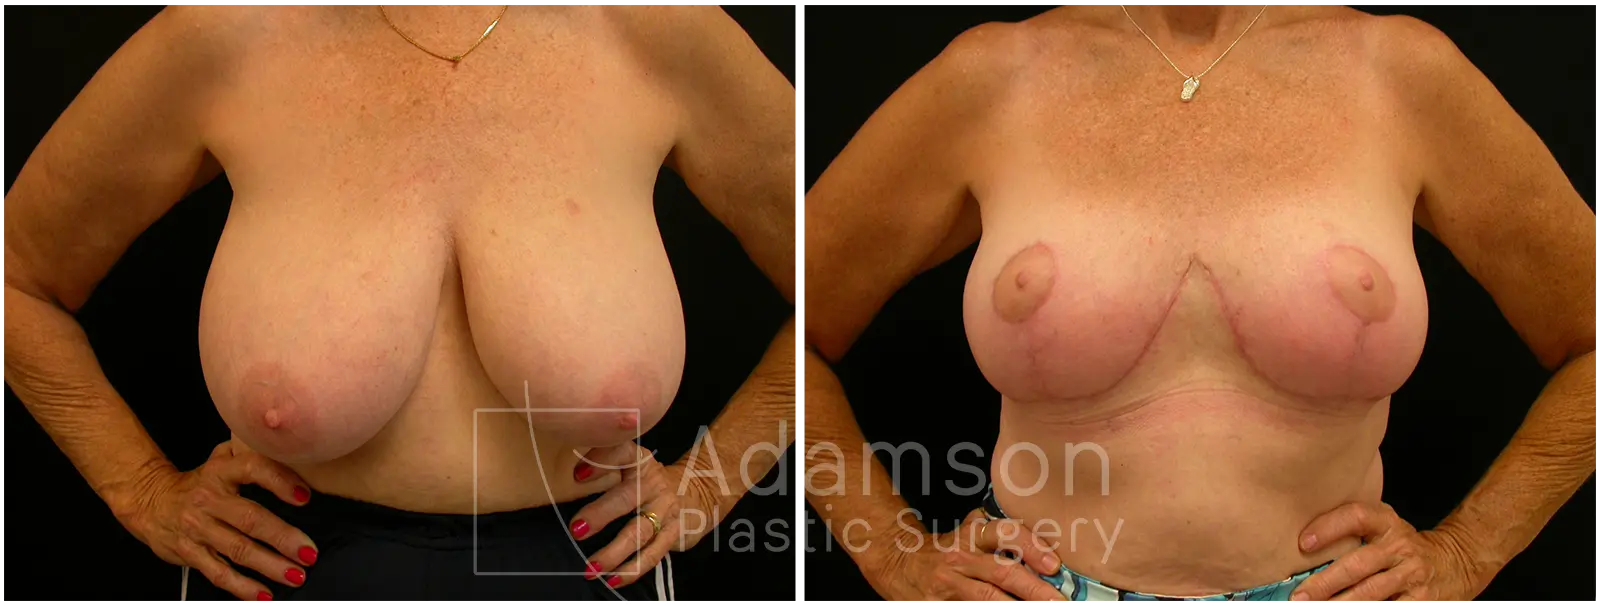 Breast Lift Reduction GS